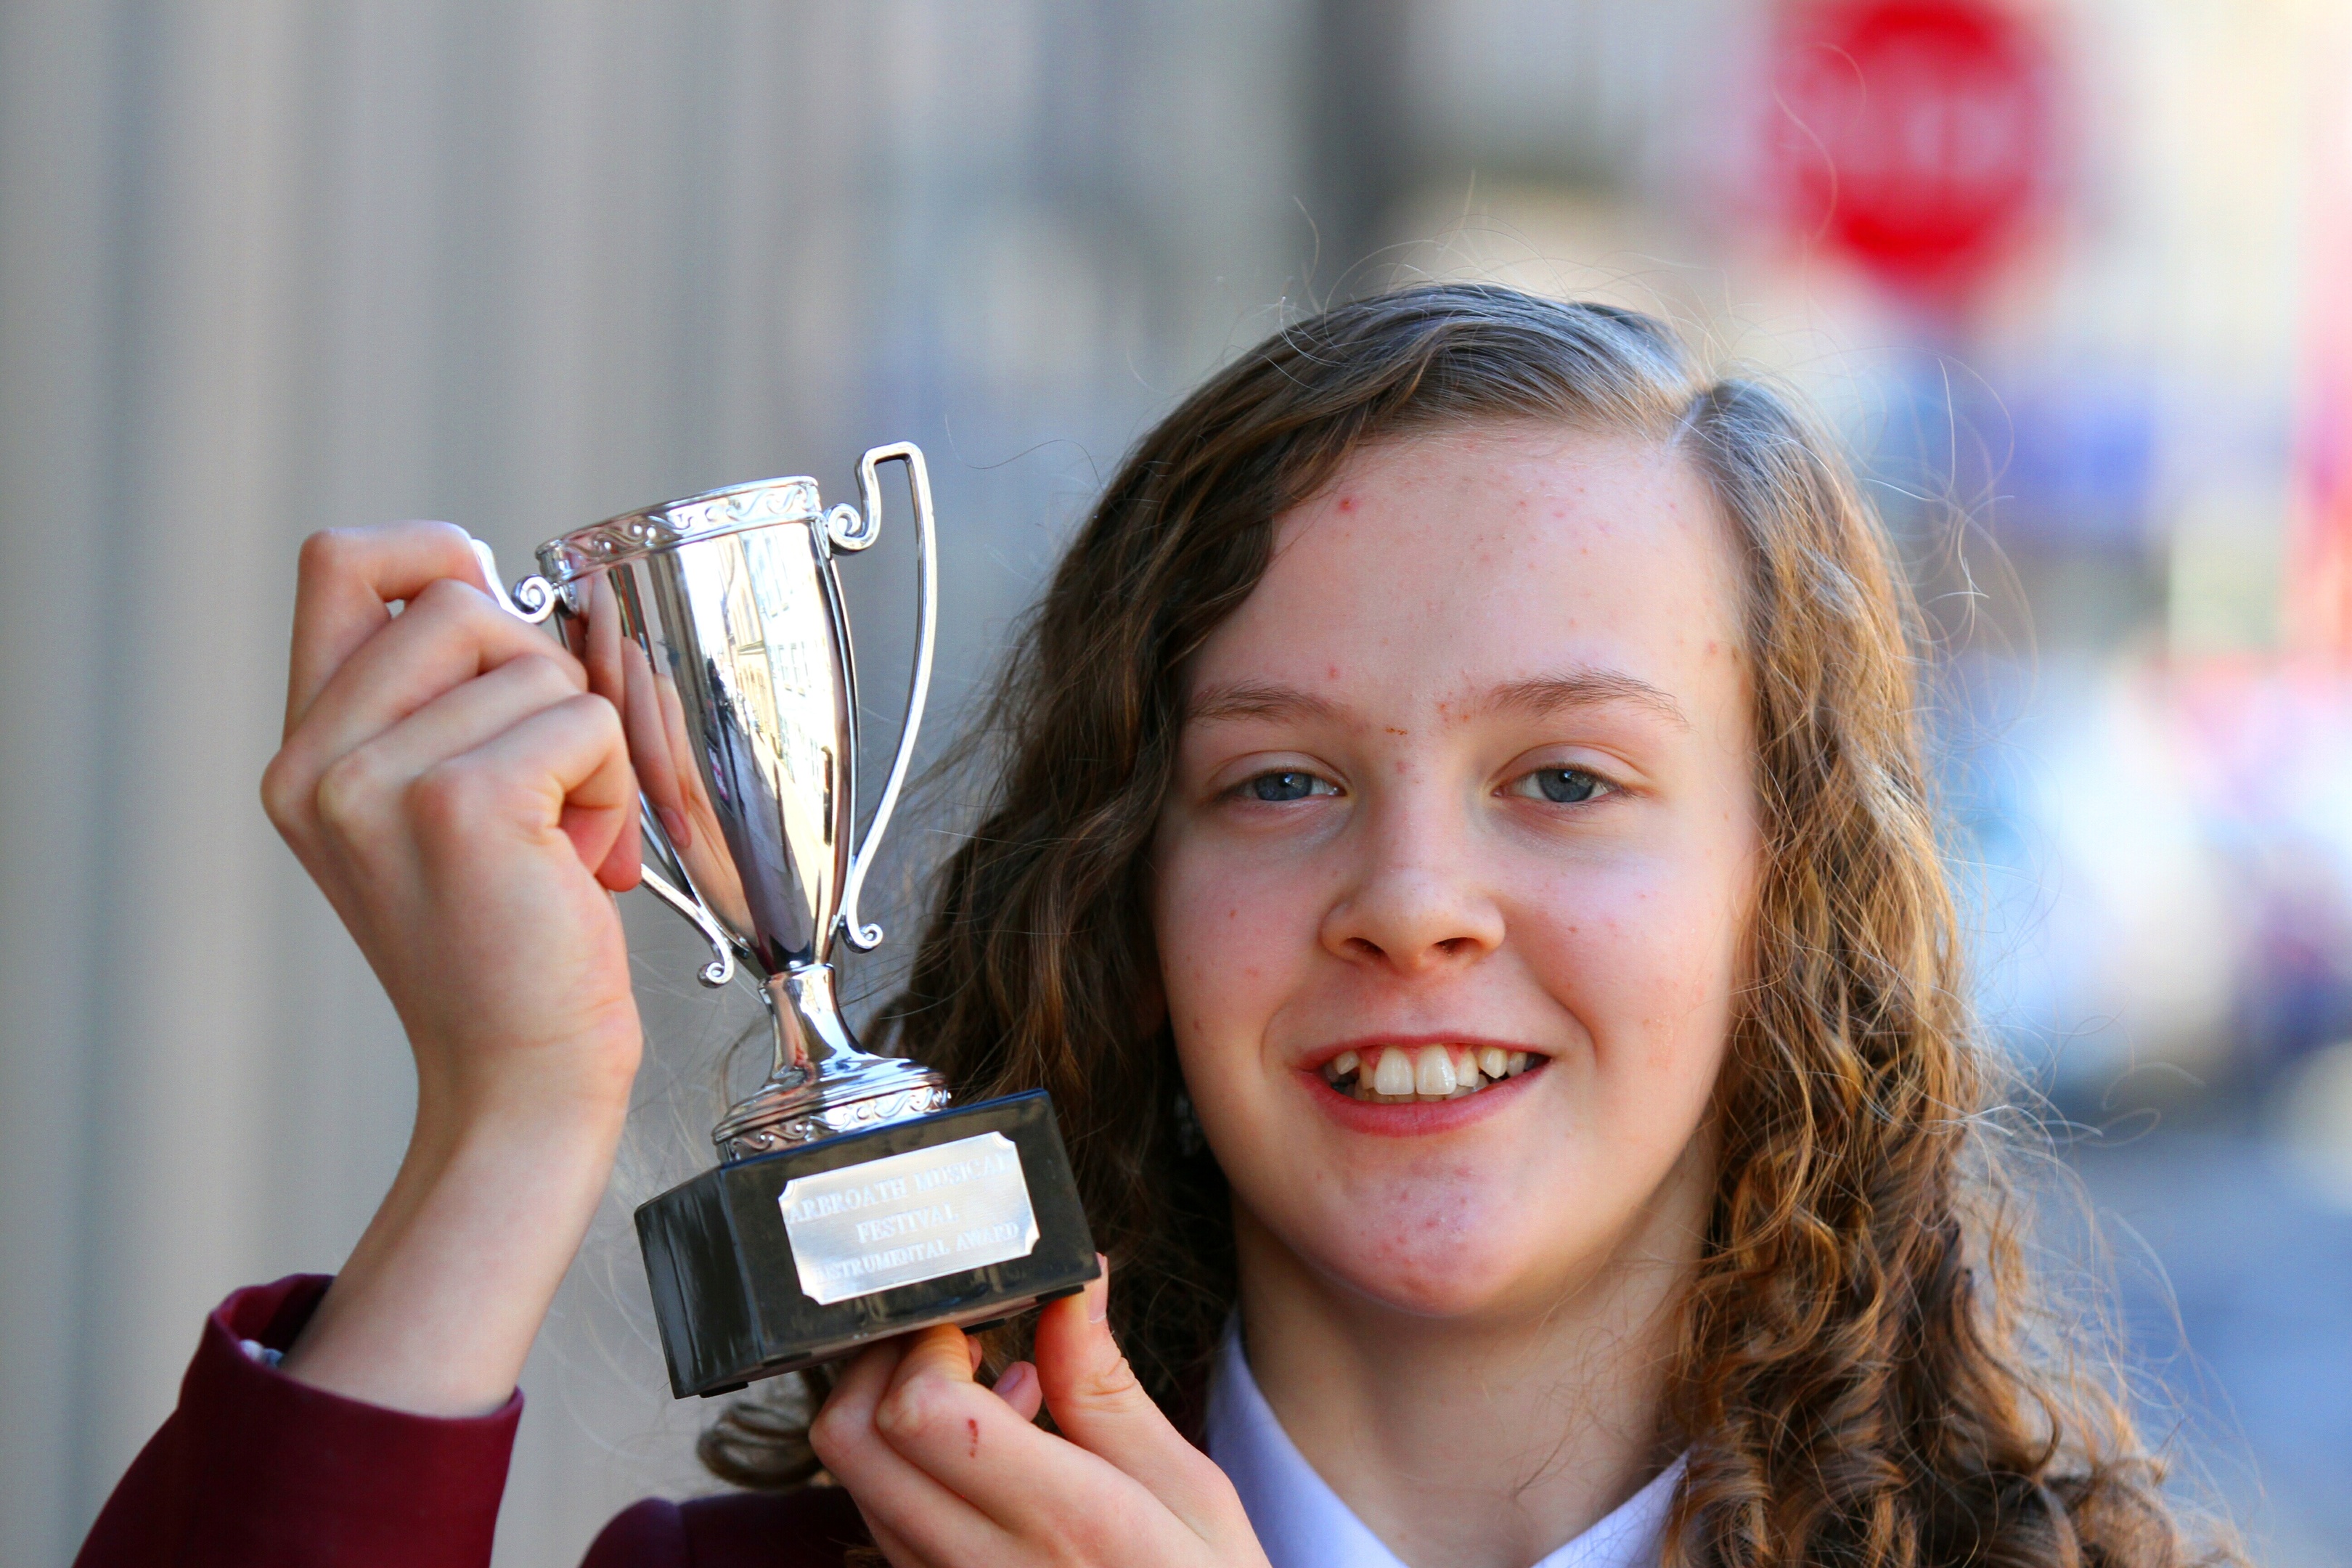 13-year-old Orla McLeod from Montrose Academy won the Class 86 Violin Solo prize.